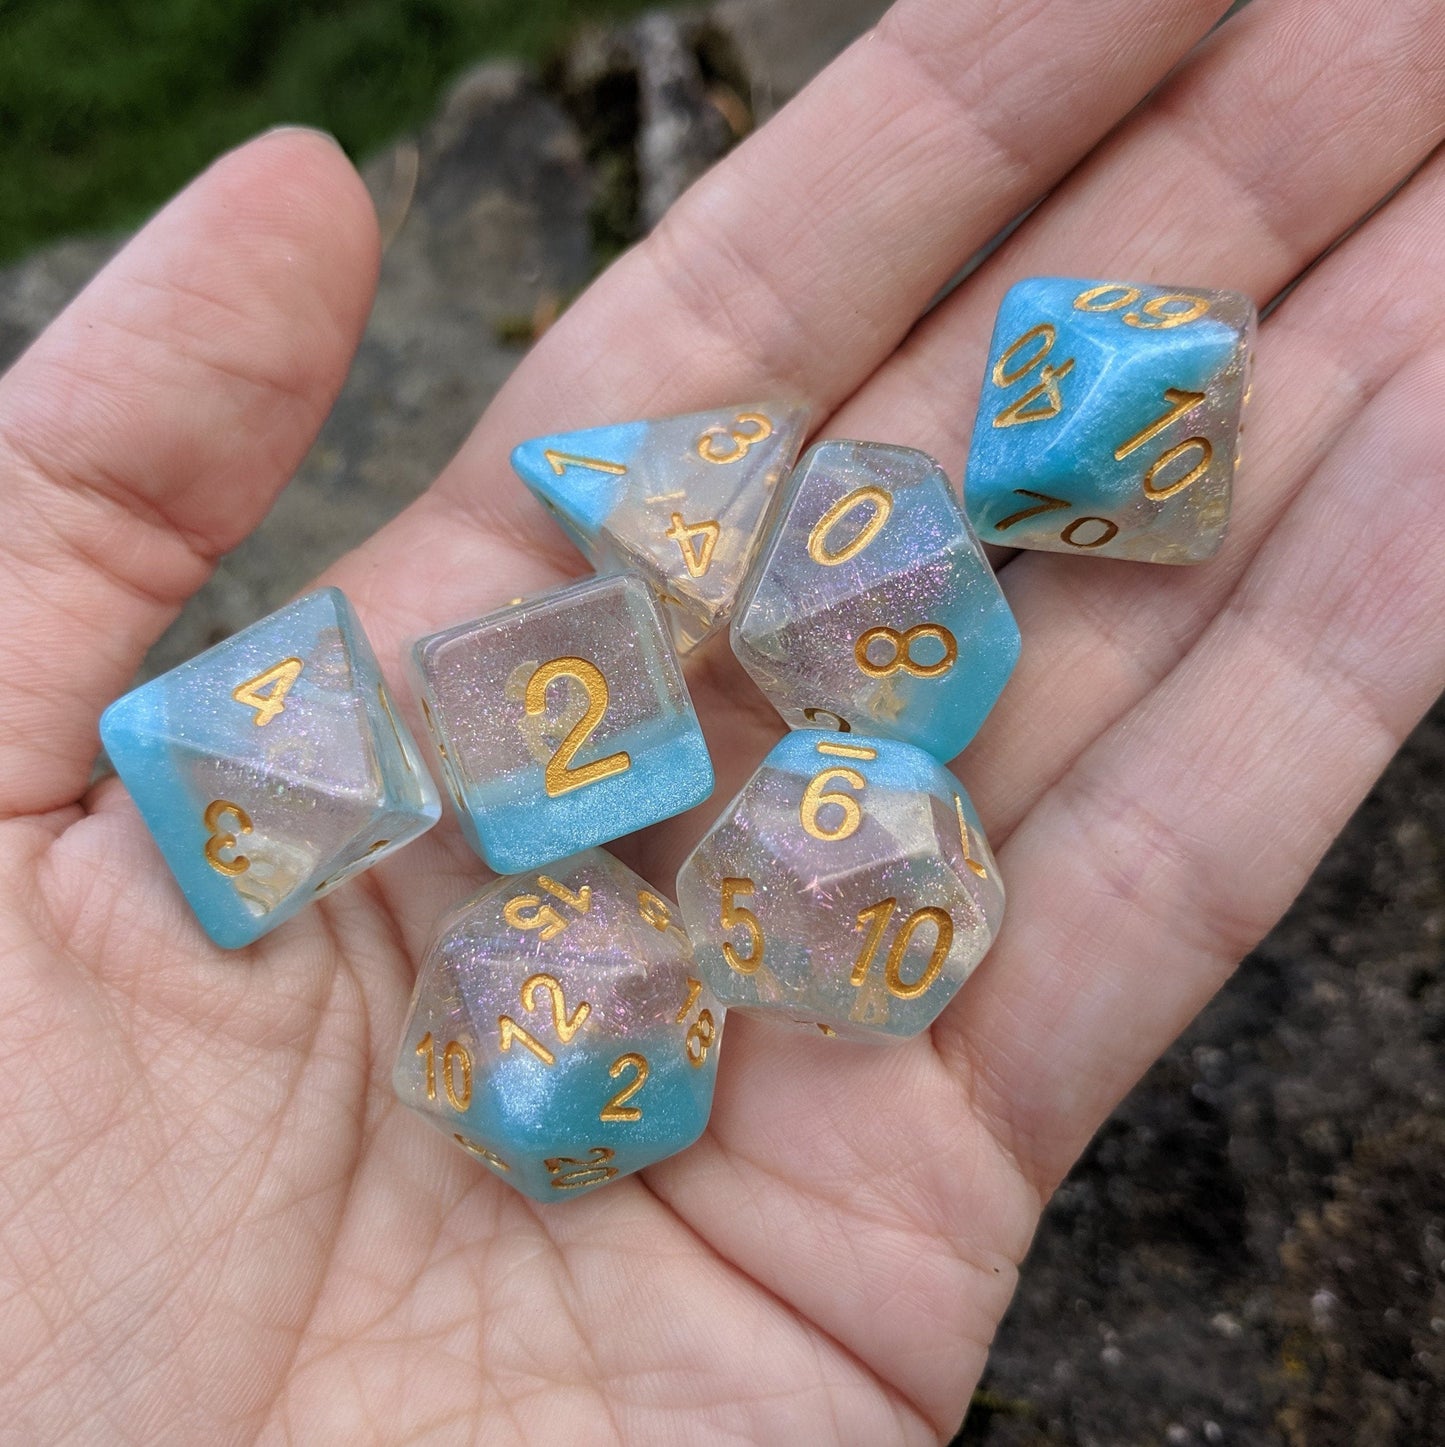 Snowflake DnD Dice Set, Shimmering Translucent Glitter Dice with a Blue Bottom Layer - CozyGamer